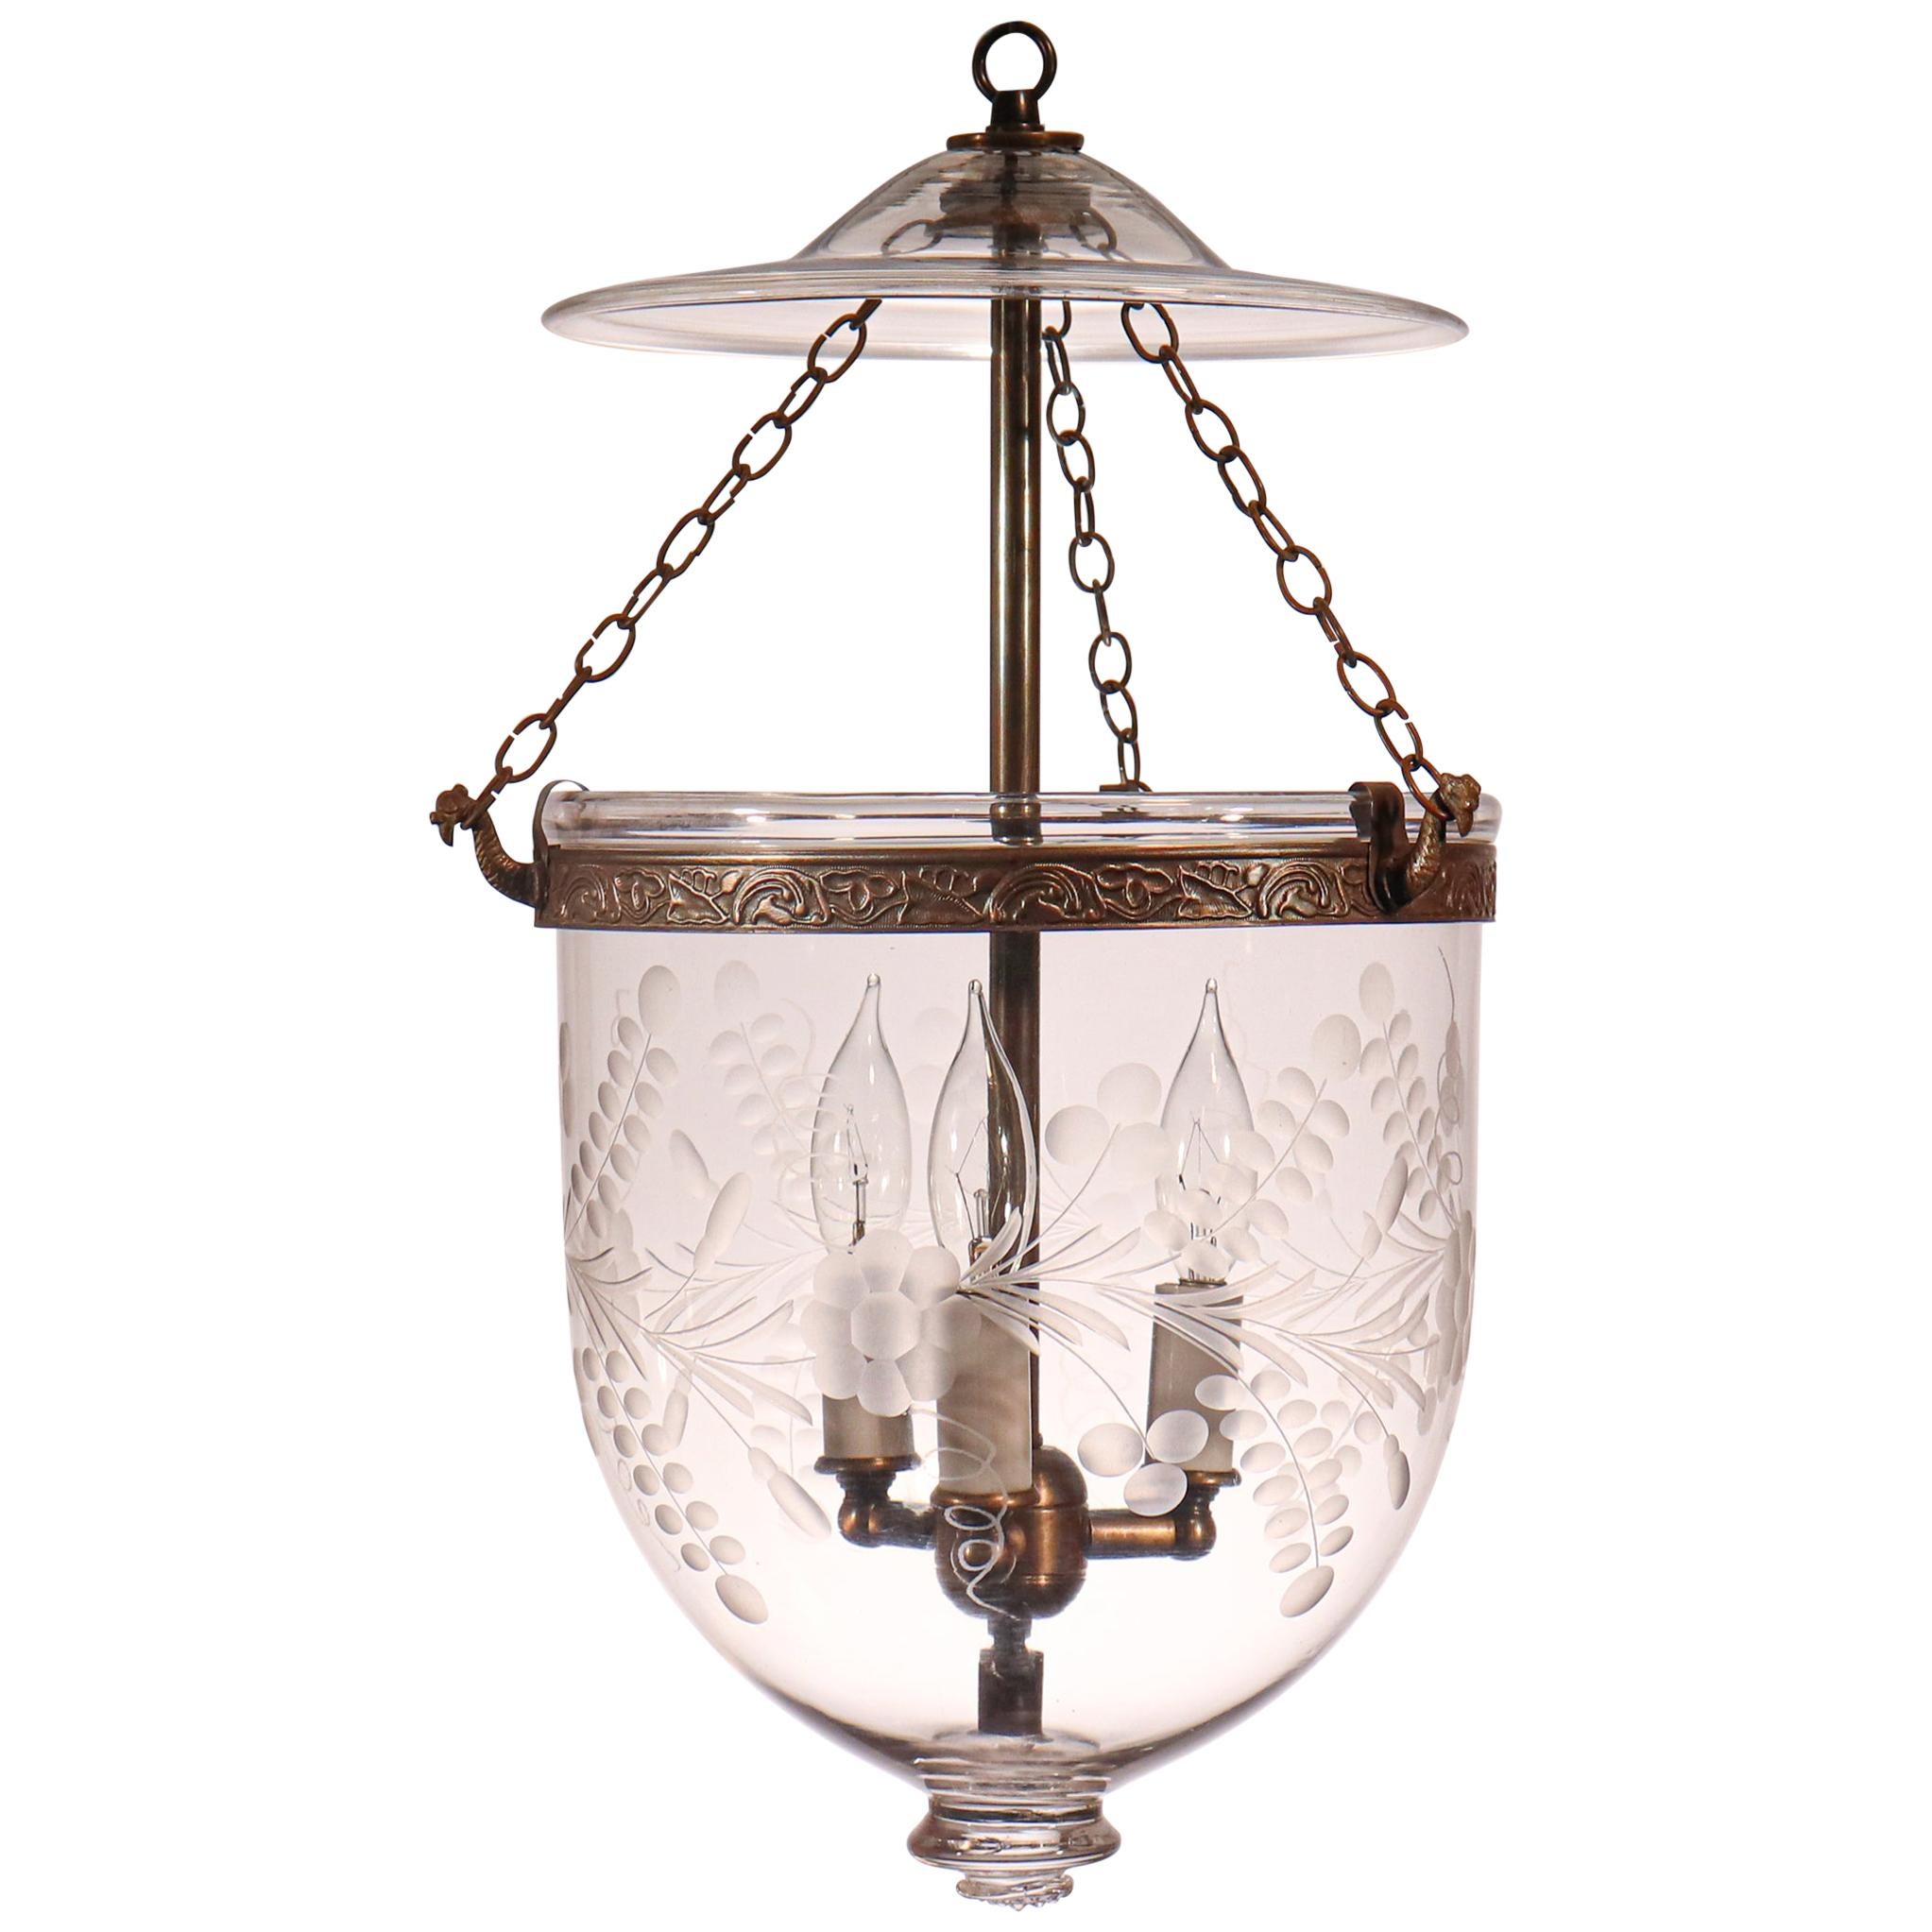 Antique Bell Jar Lantern with Floral Etching